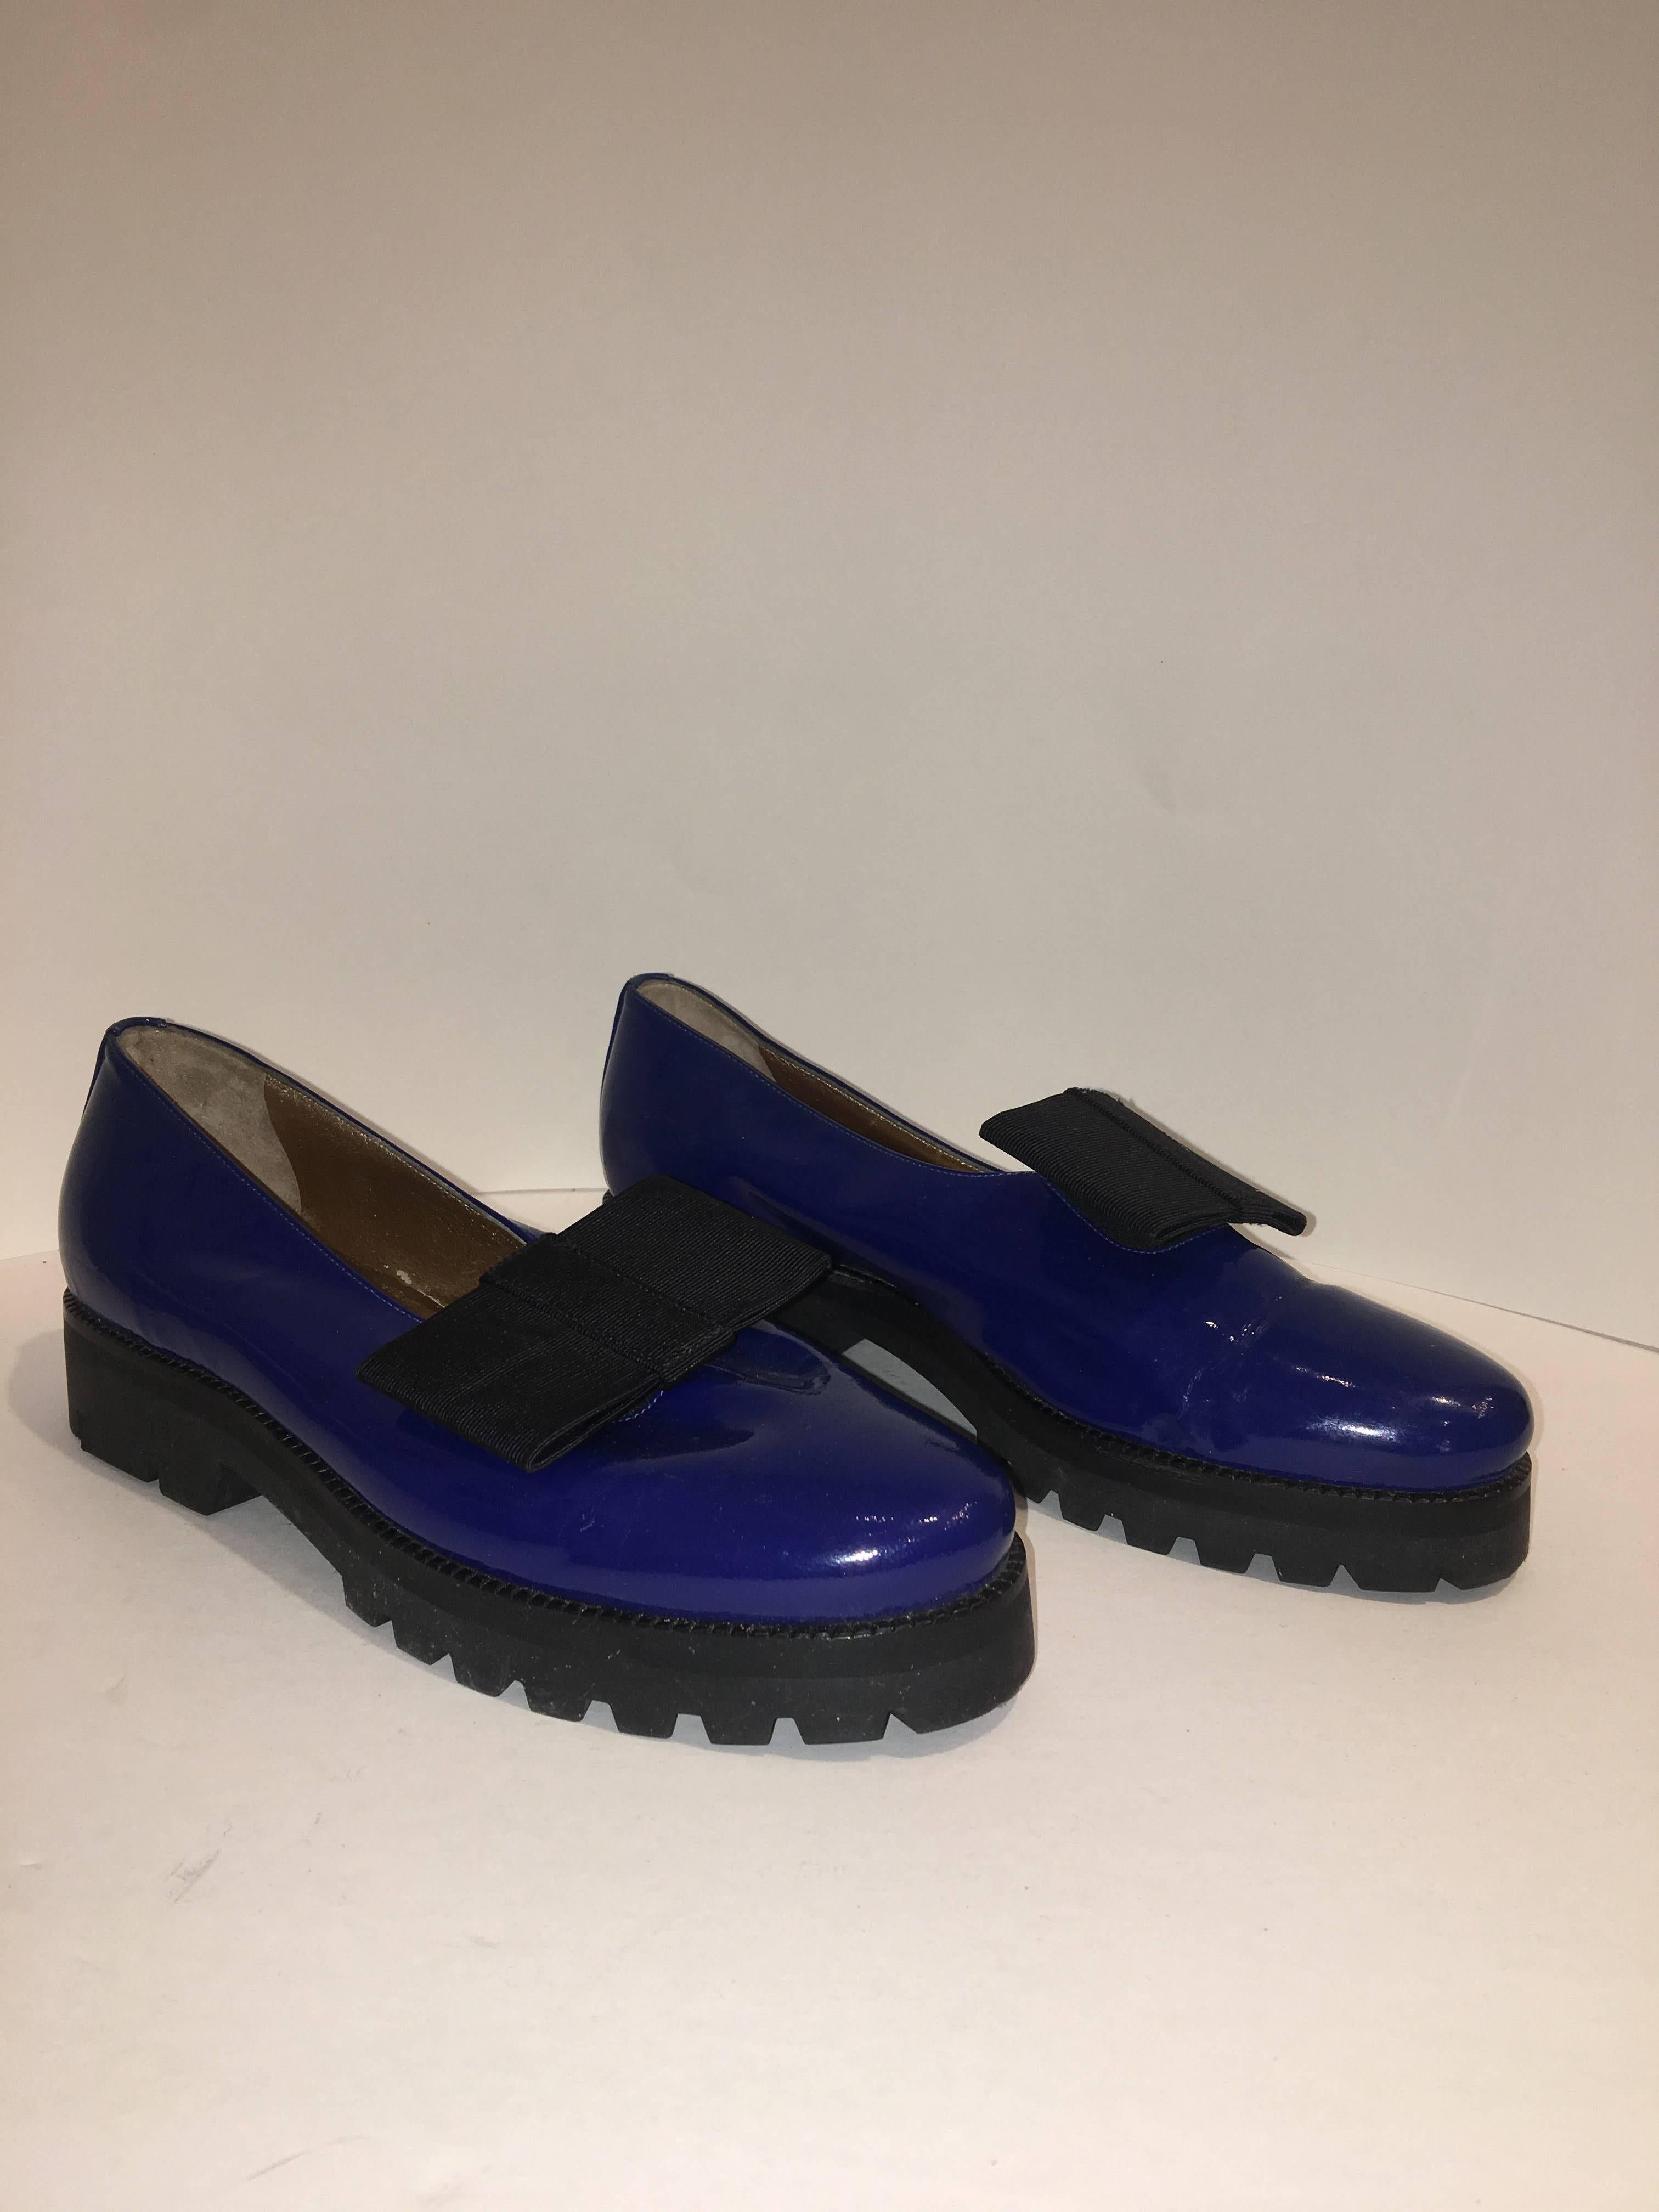 Steiger Lug-Sole Loafer with Bow detail. Royal Blue Patent Leather in size 39 with Black Lug Sole.